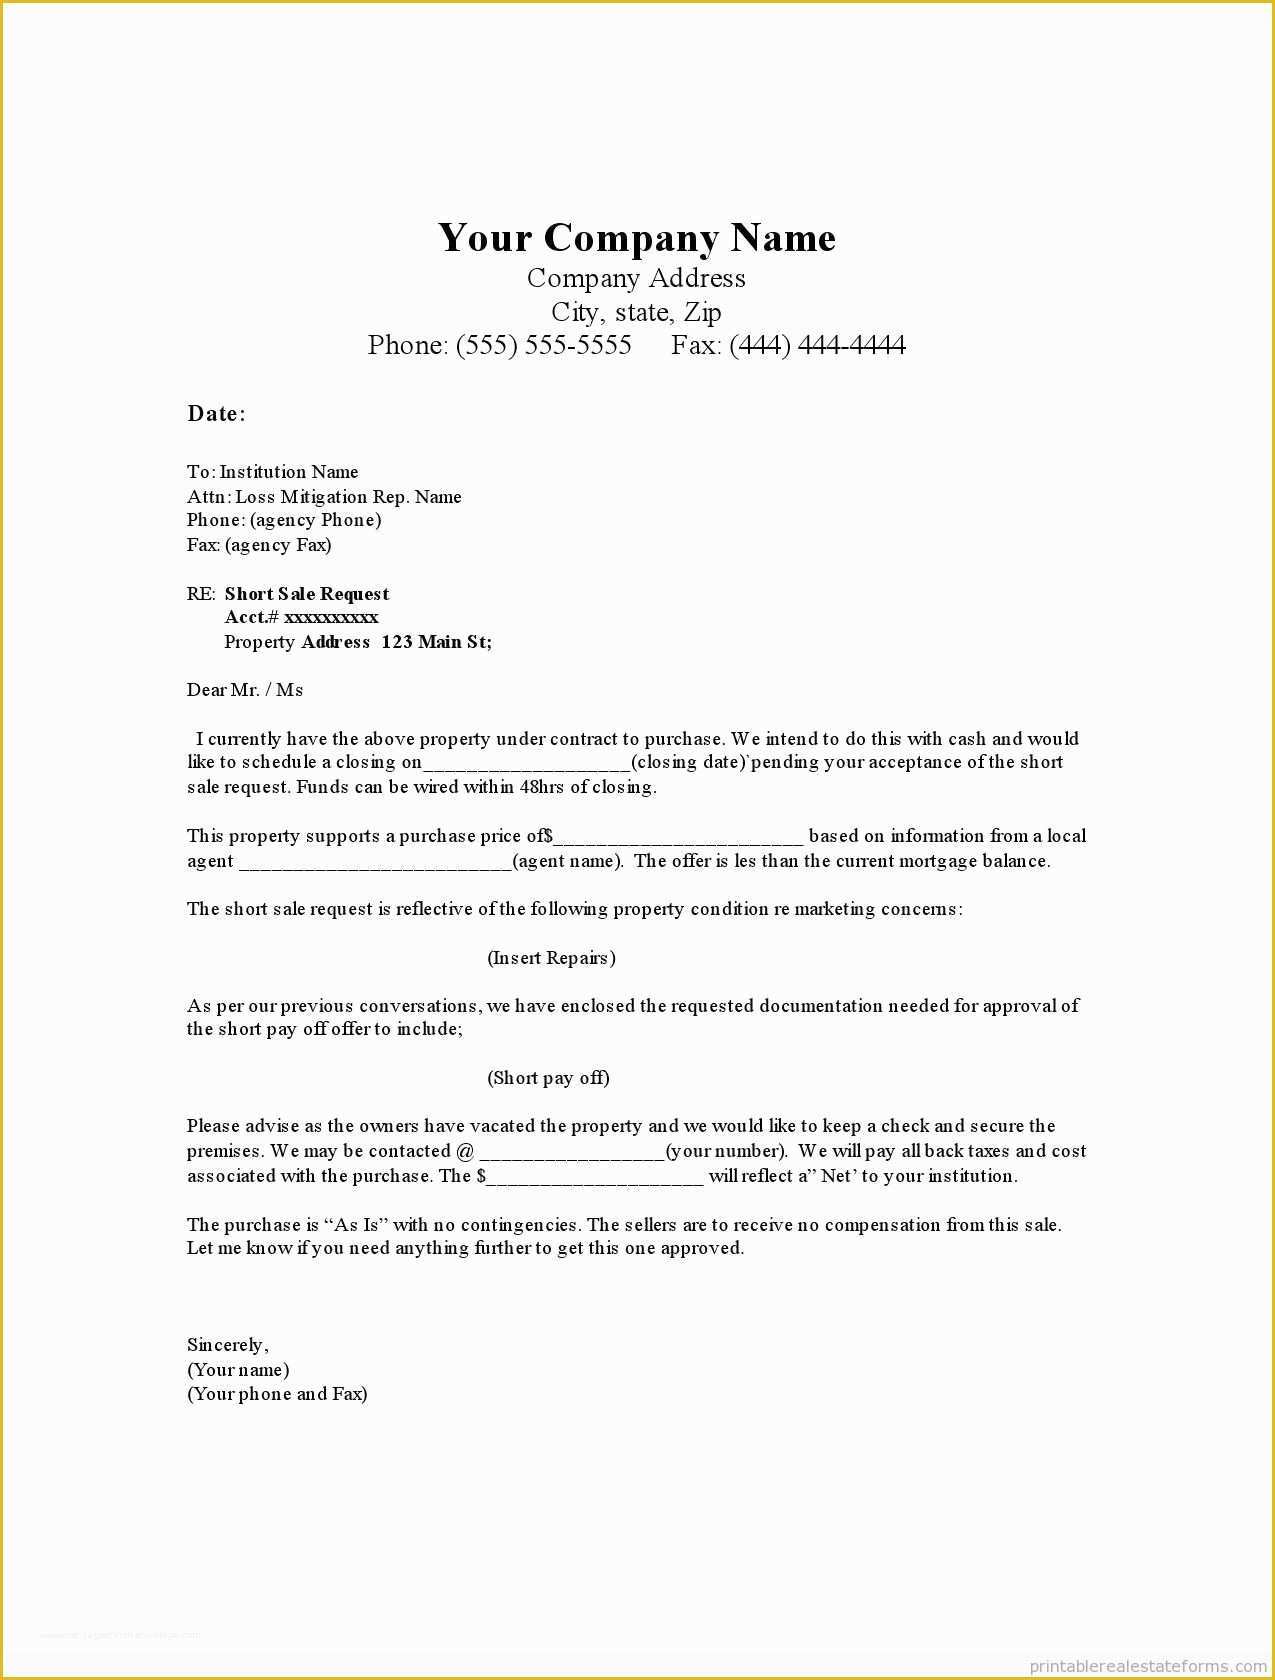 Real Estate Letters Free Templates Of Printable Short Offer Letter Good Condition Template 2015